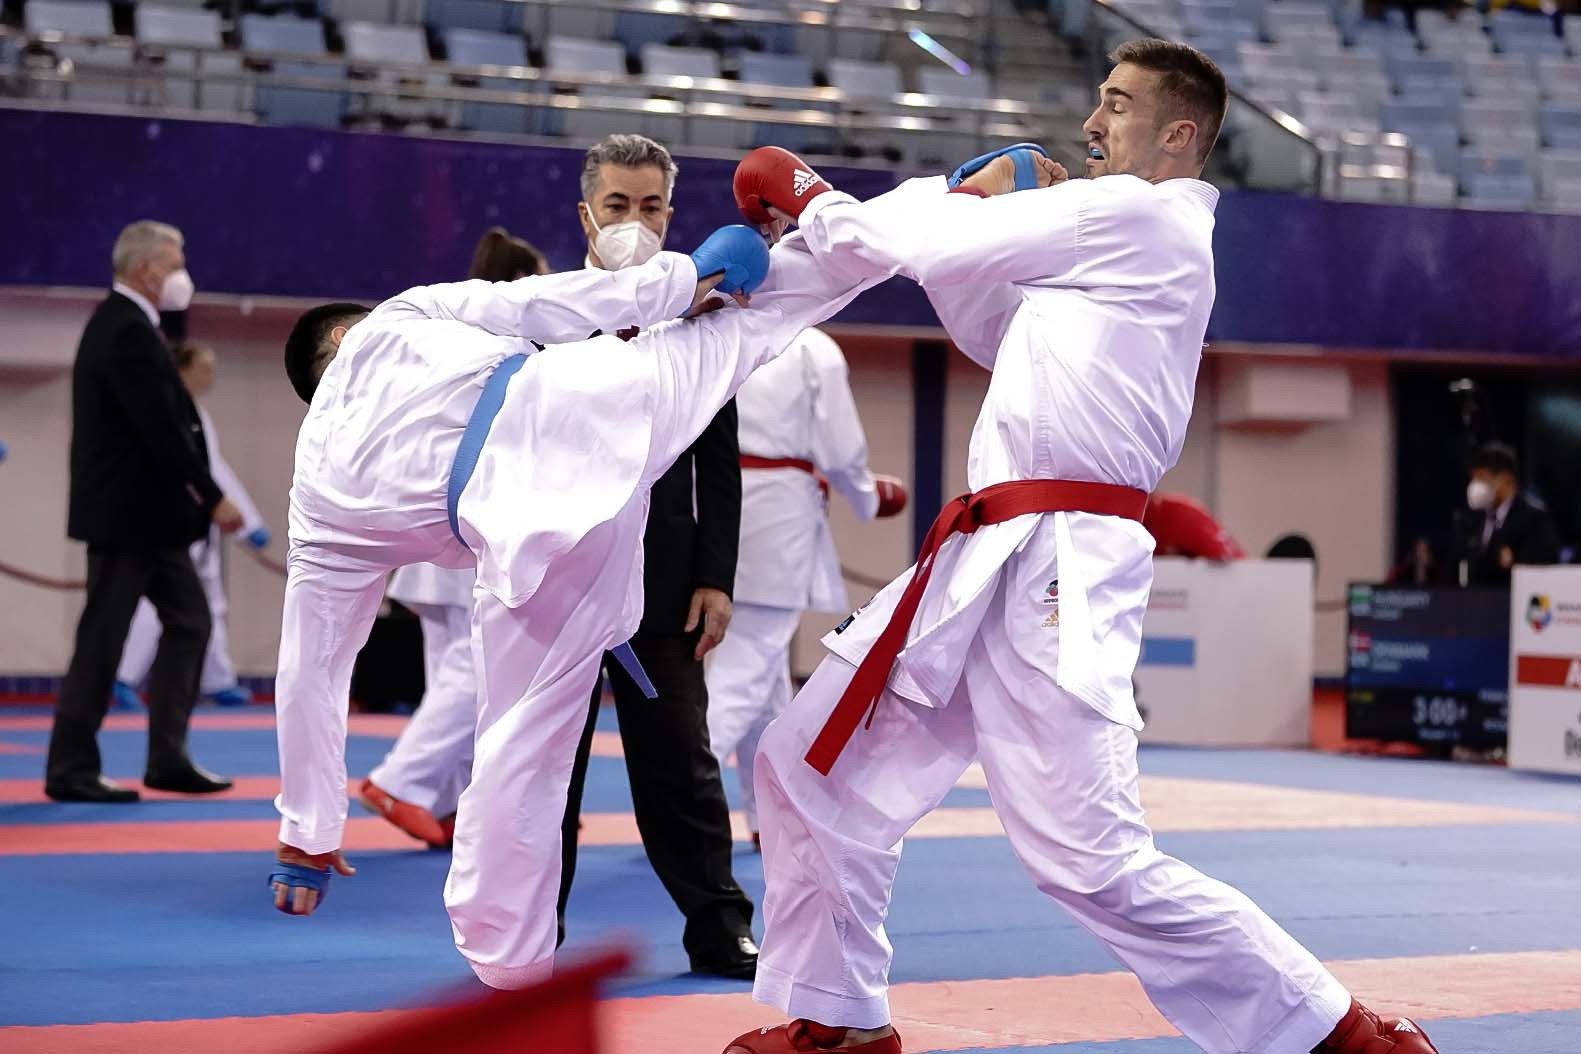 The men's event has been whittled down to the last 32 teams ©WKF